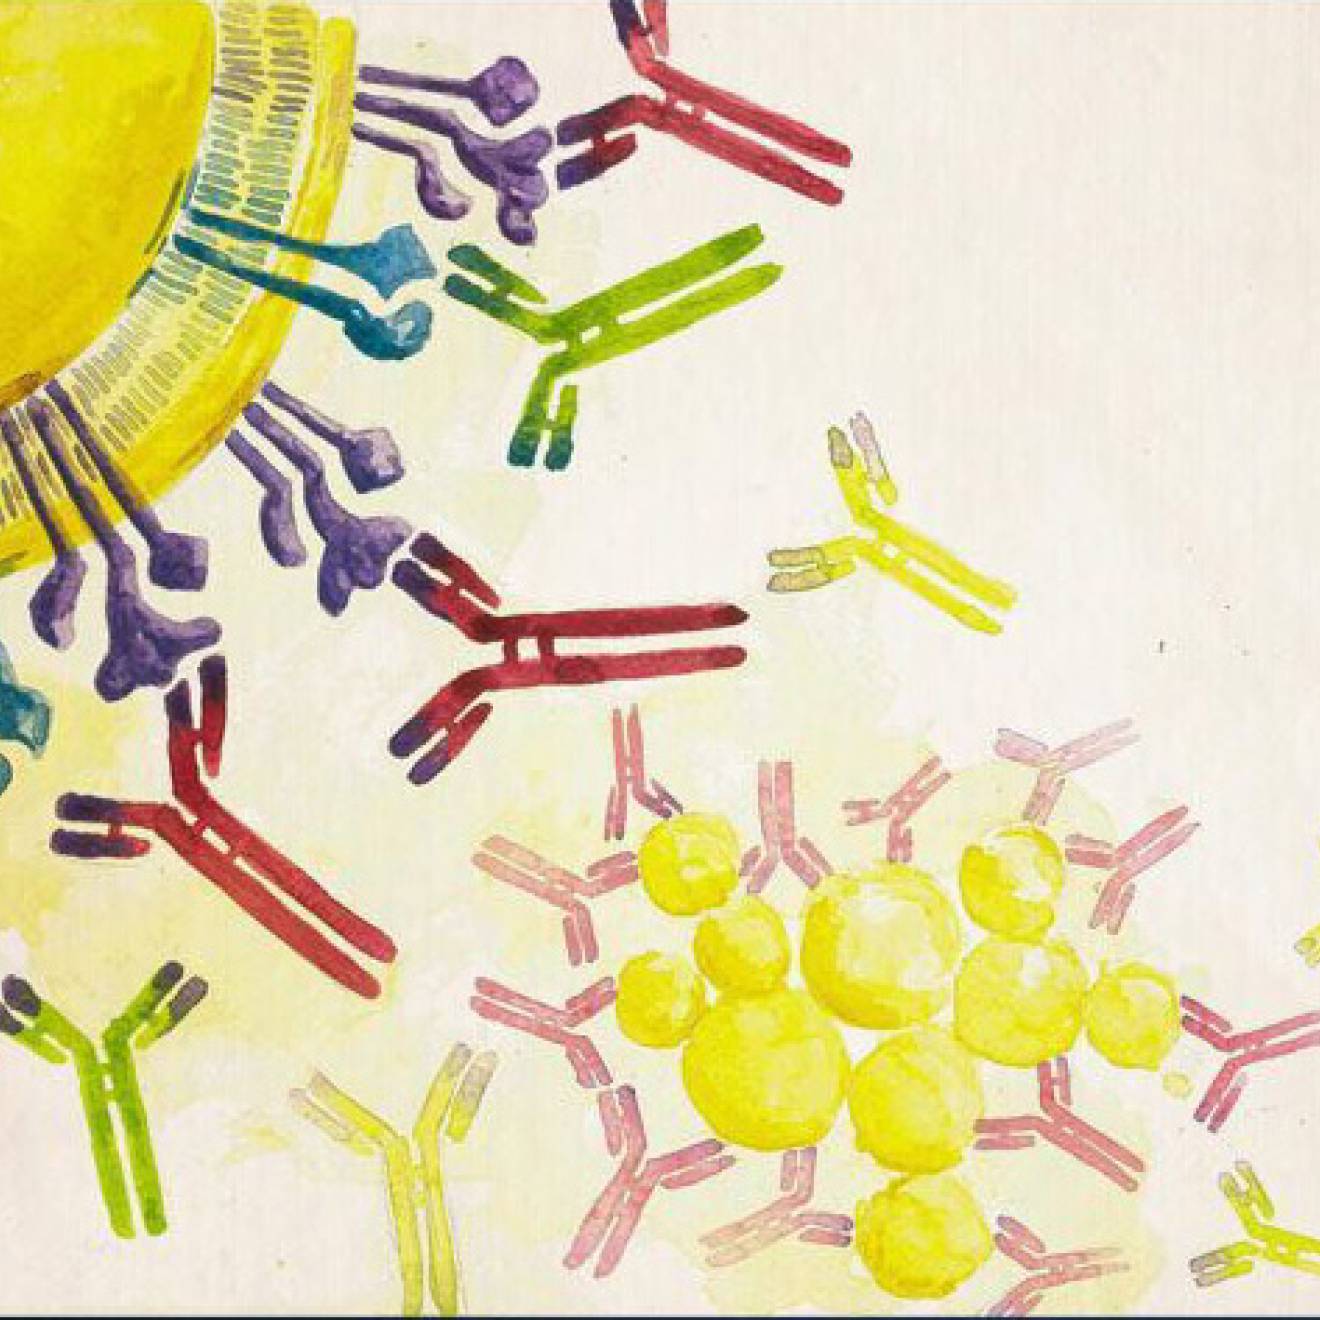 Watercolor illustration of a microscopic concept of a bacterium with antibodies